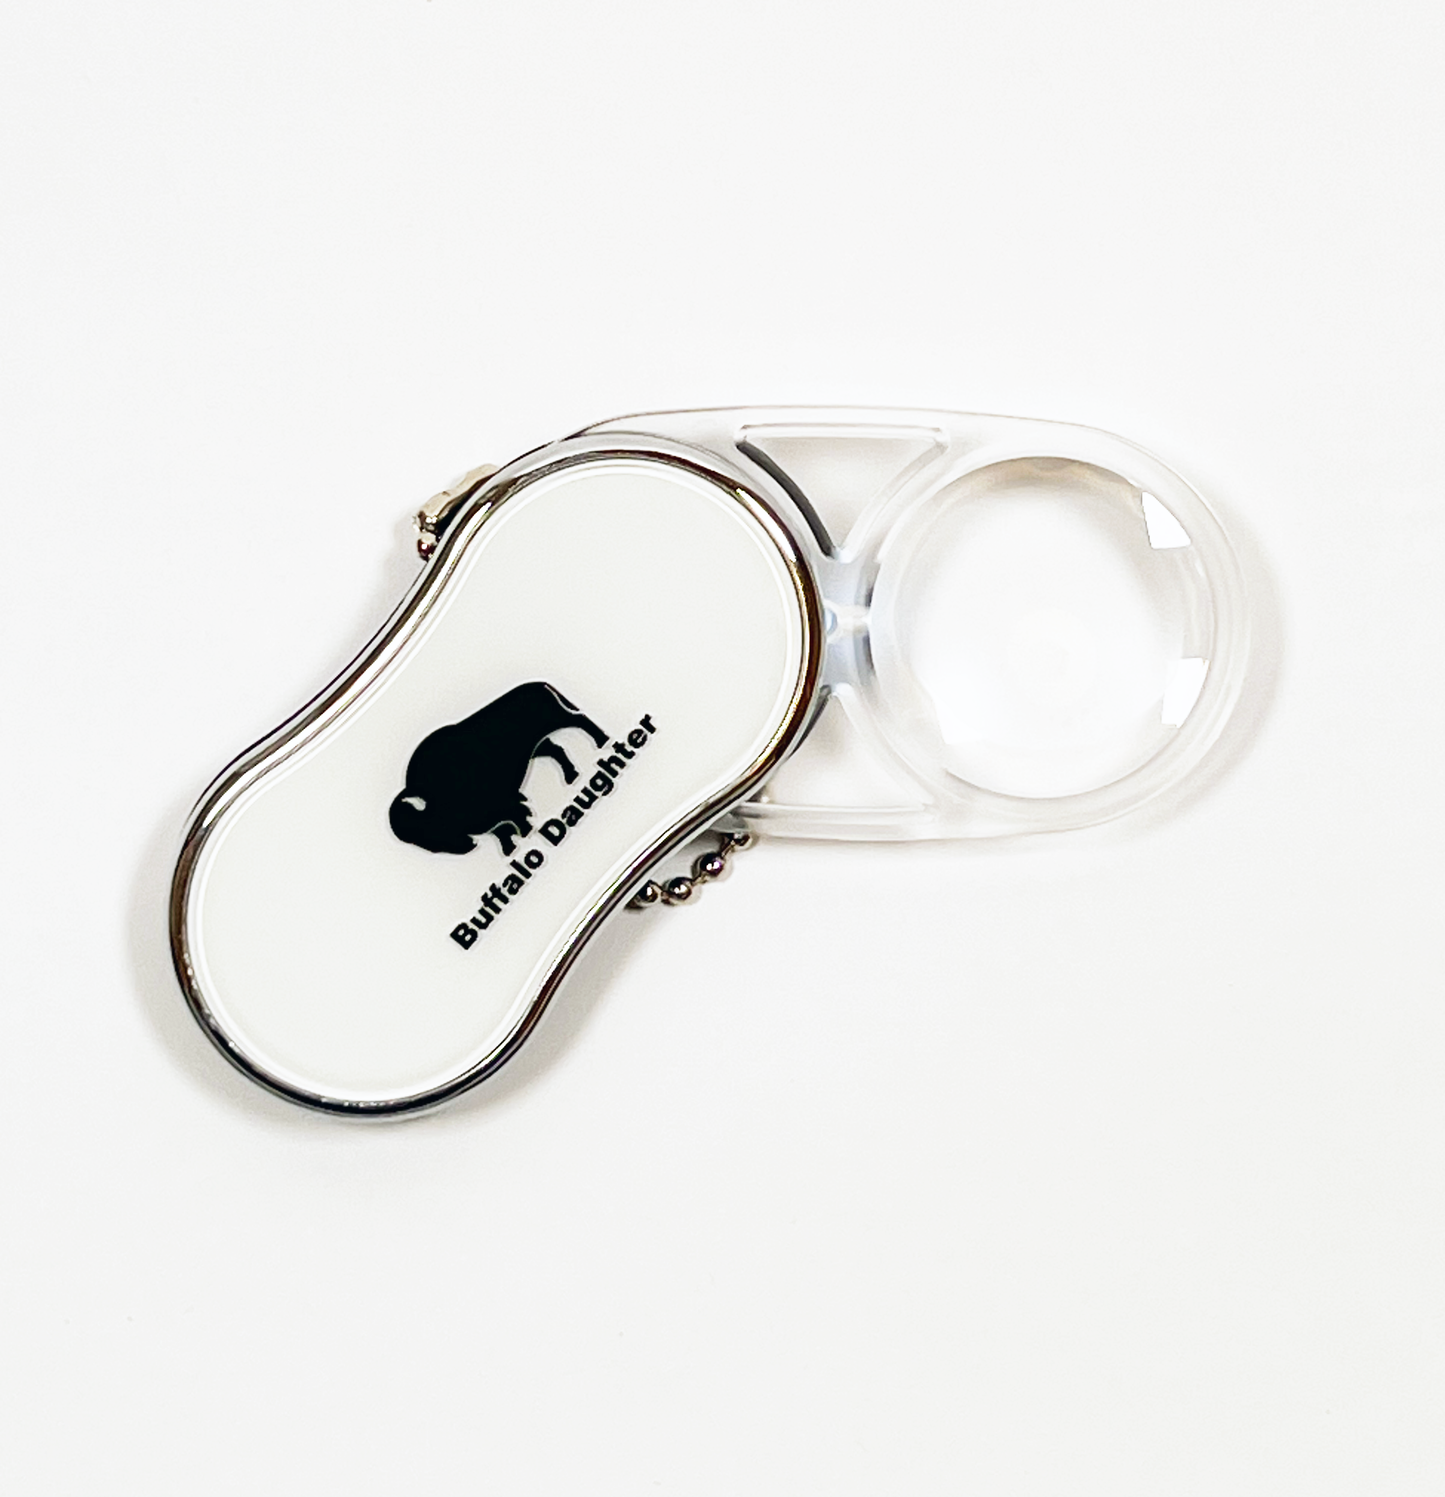 Buffallo Daughter Loupe with LED light